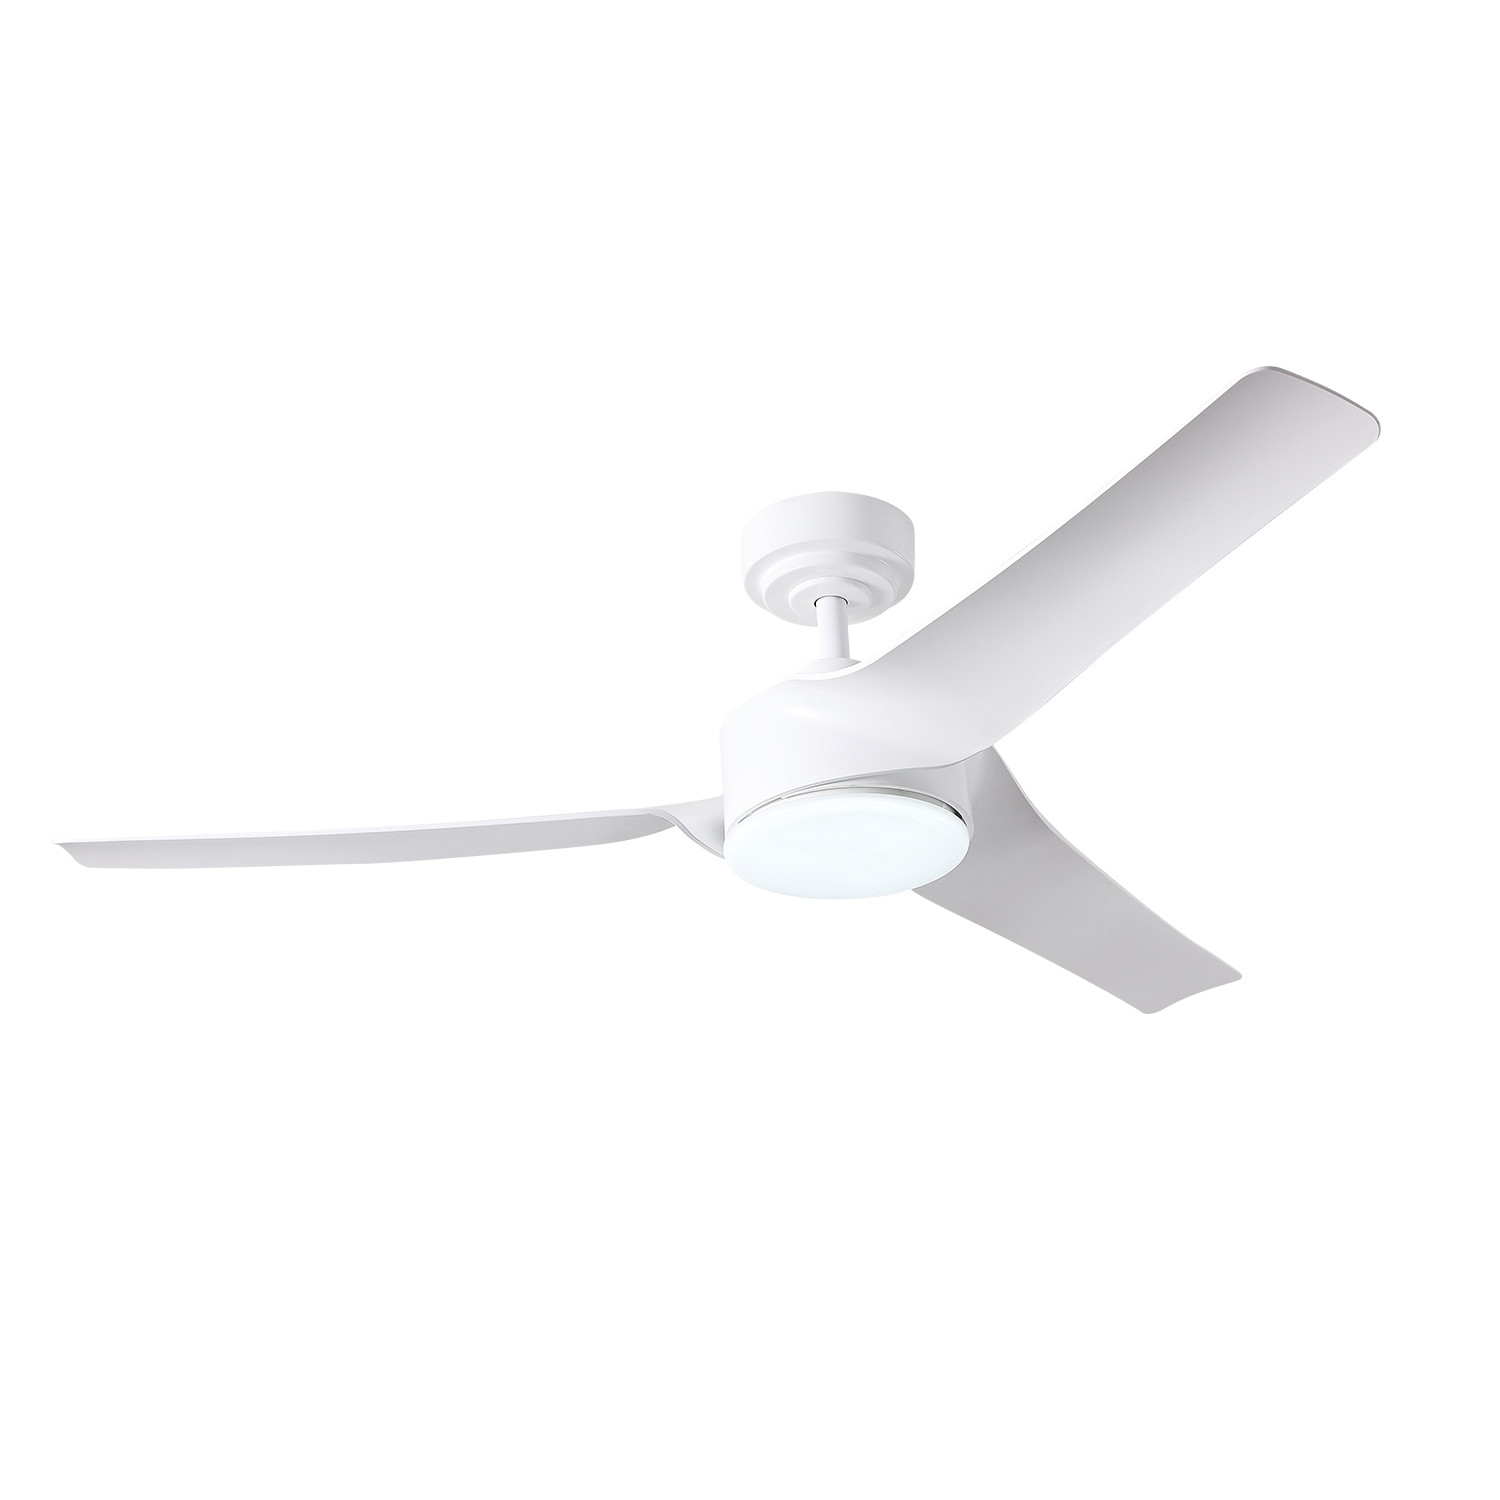 Zhongshan Modern Decorative Cieling Fan Chandelier White 3 ABS Blades Dc Bldc Remote Control Ceiling Fan with LED Lamp